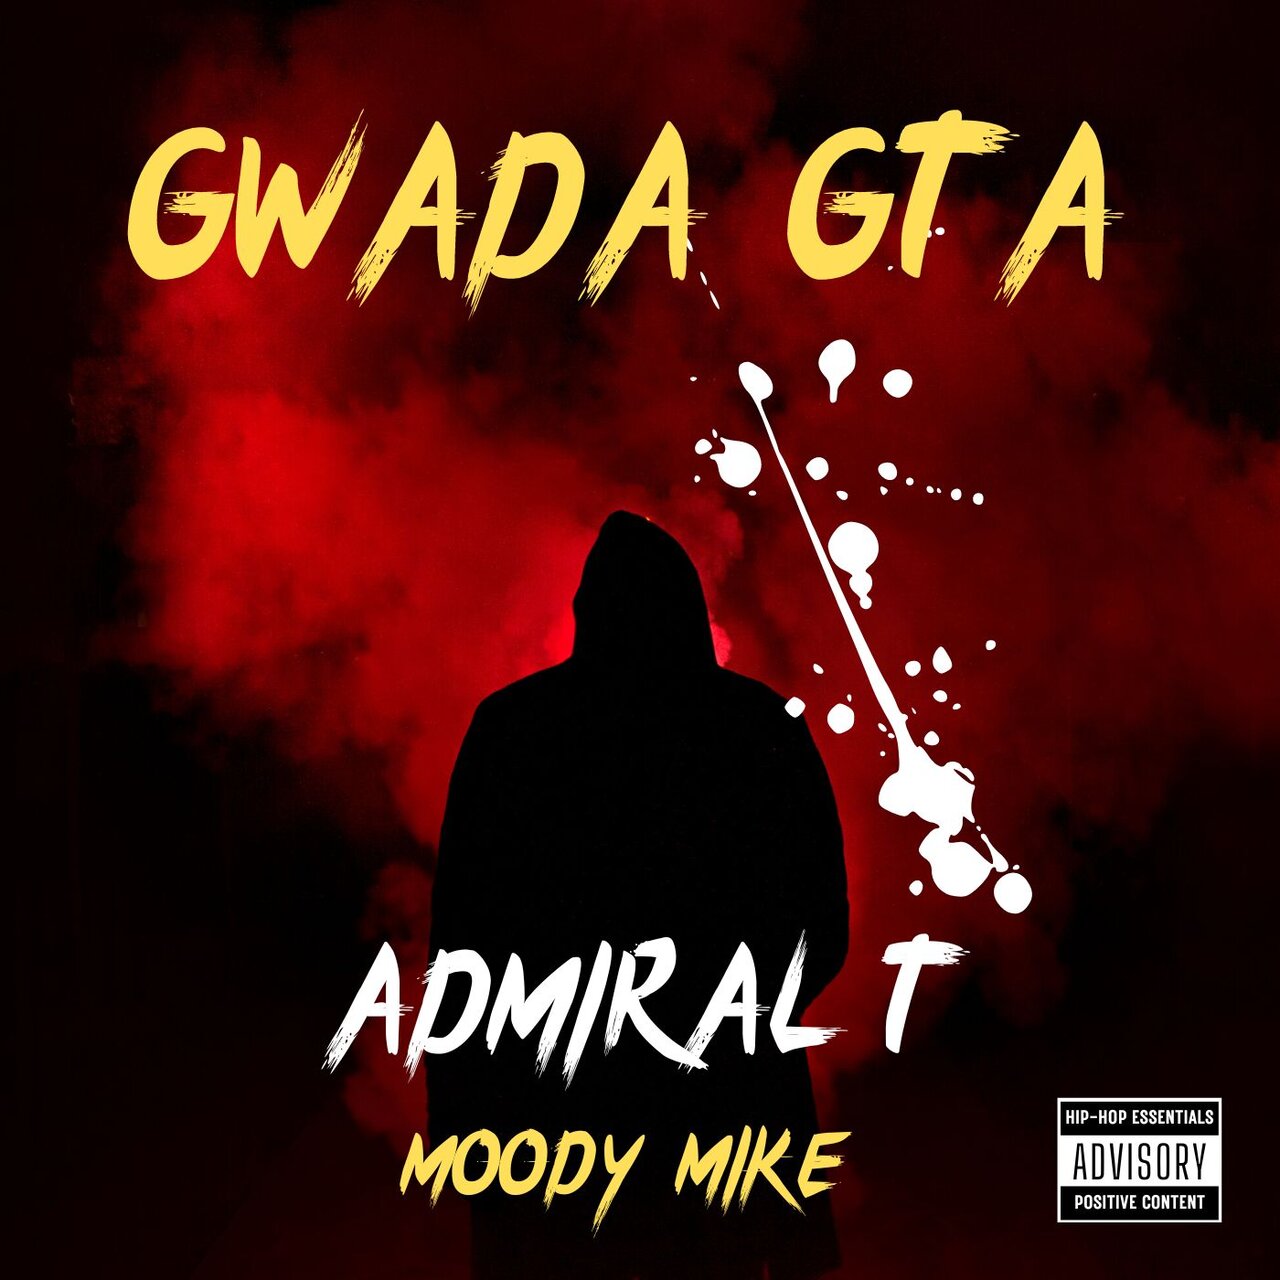 Admiral T - Gwada GTA (ft. Moody Mike) (Cover)